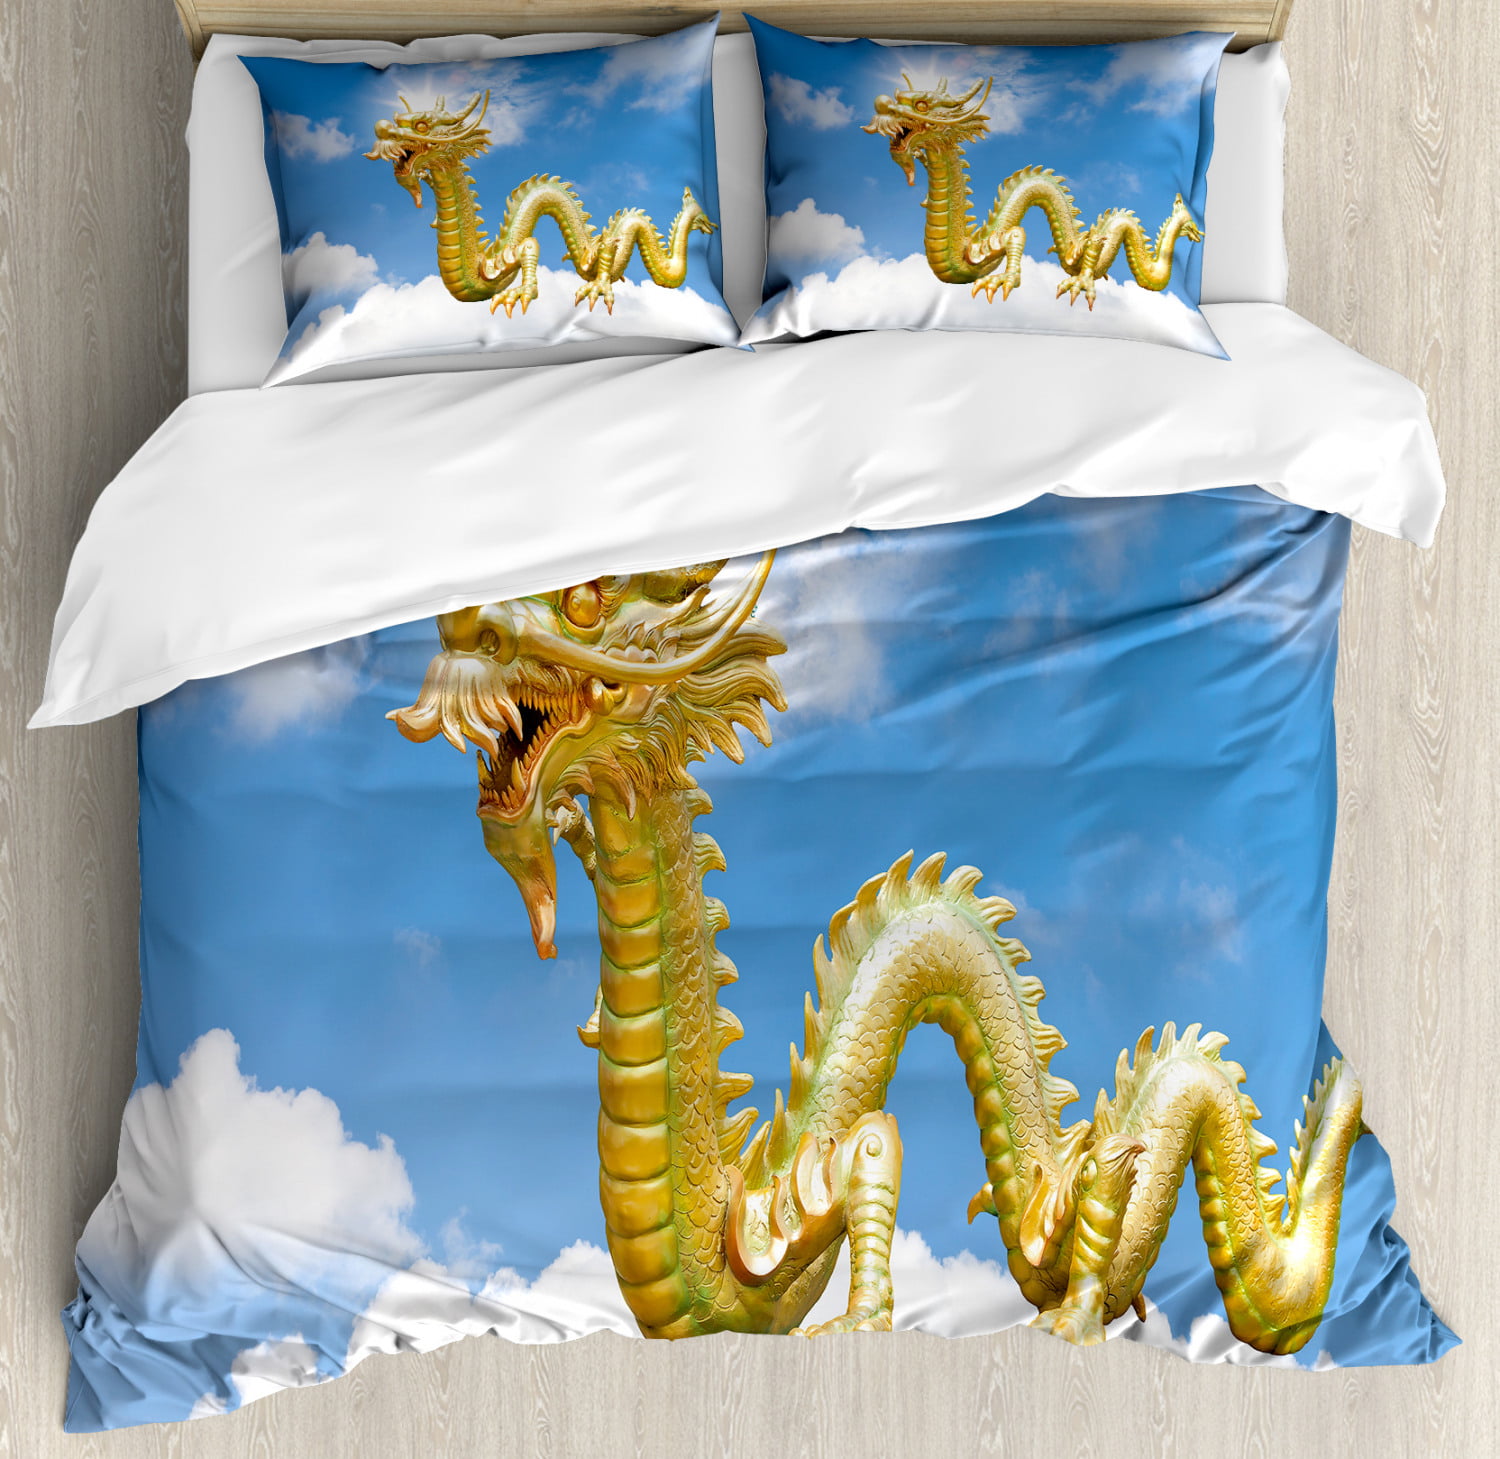 Chinese Dragon mythical Bedding set Duvet/Quilt Cover Pillowcase Bedroom Cartoon 